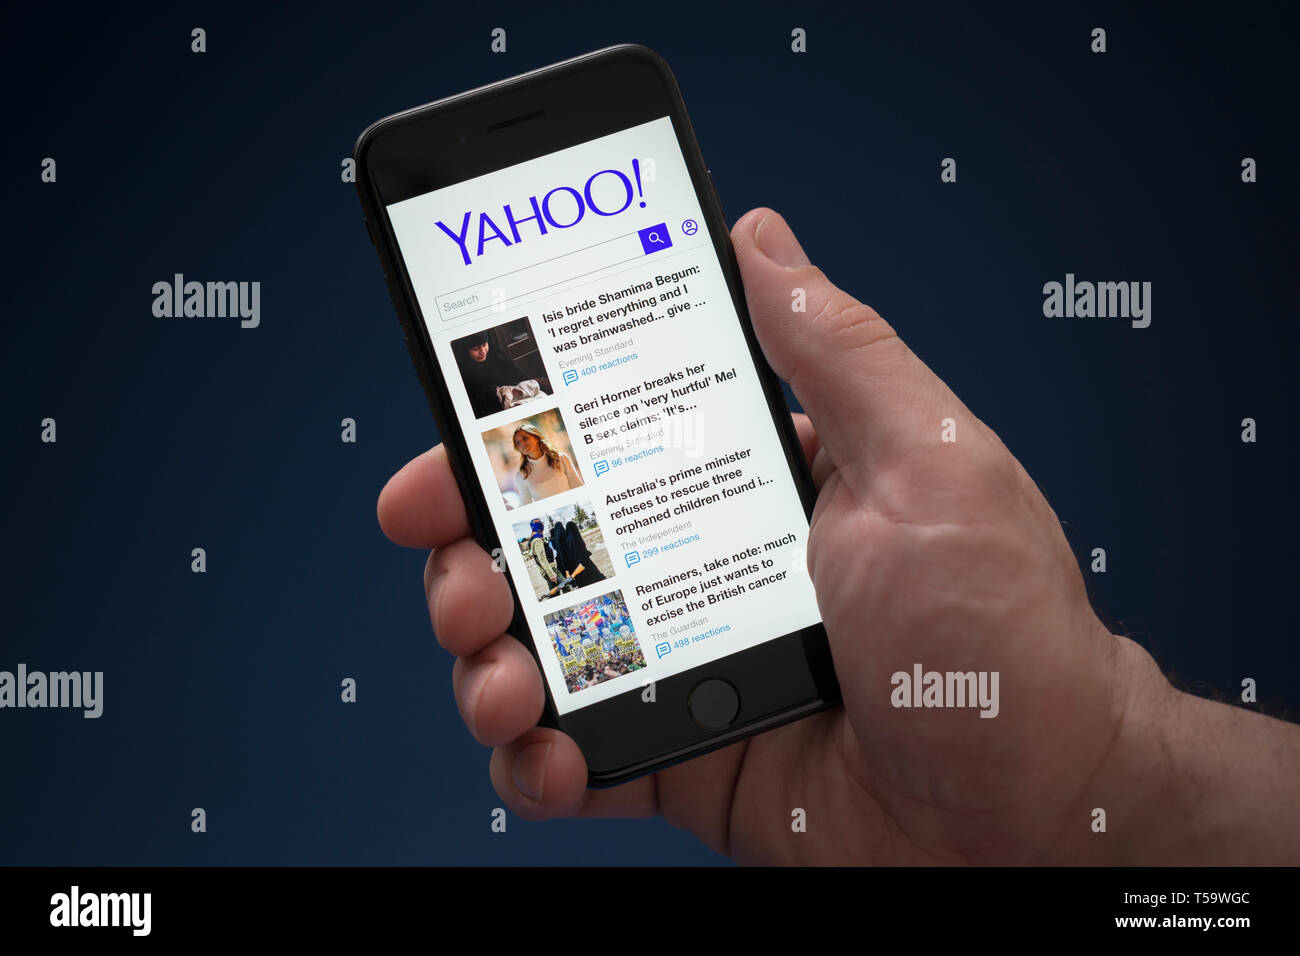 A man looks at his iPhone which displays the Yahoo logo (Editorial use only). Stock Photo